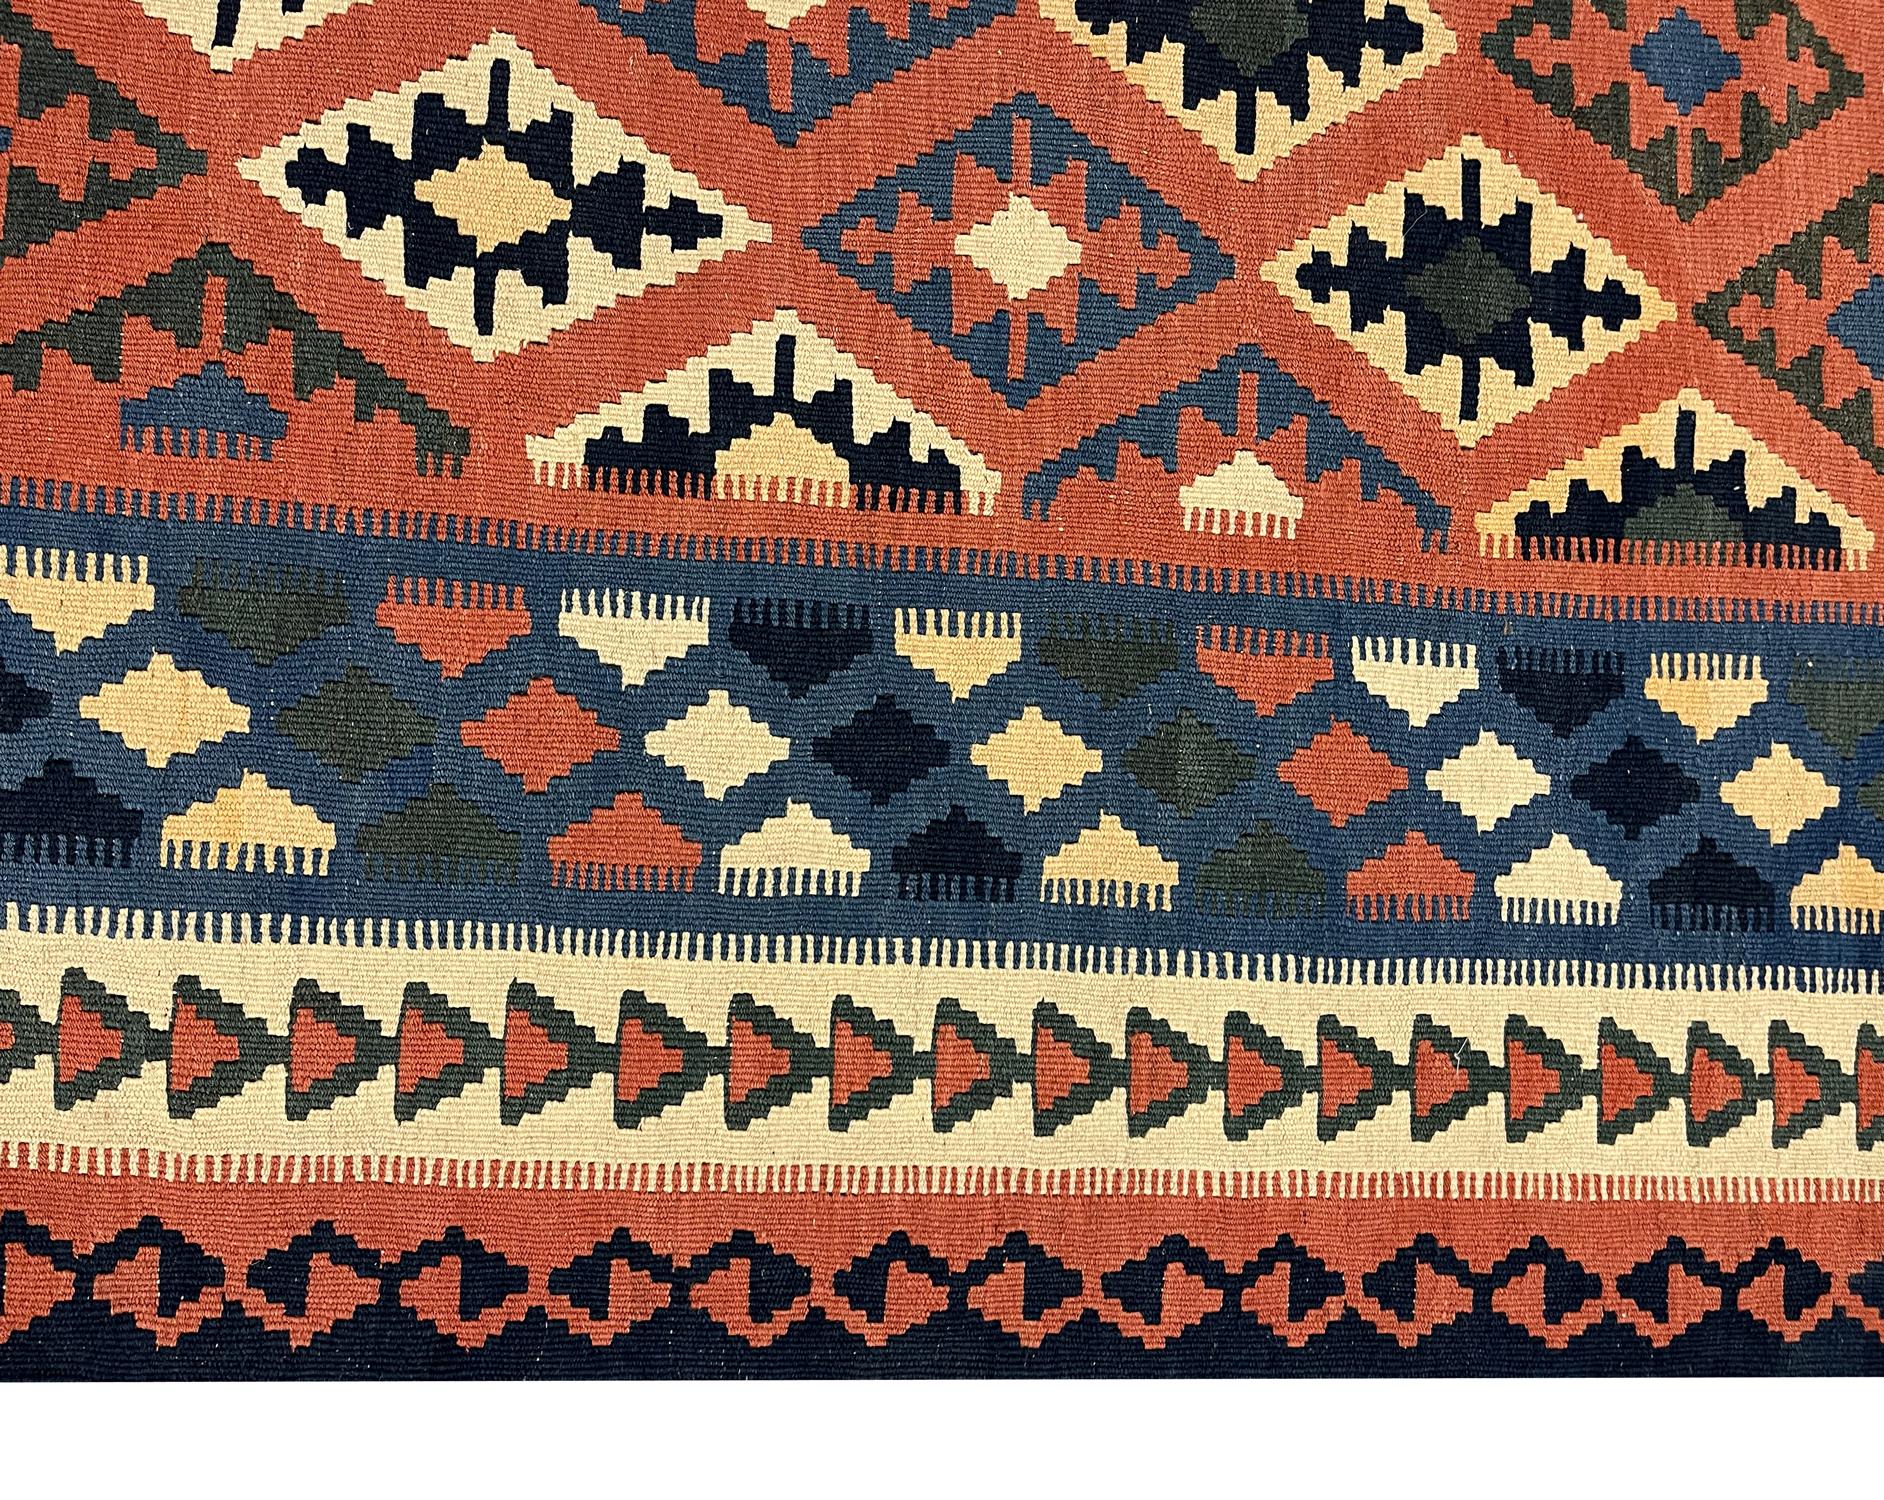 This fine kilims wool area rug is an excellent example of flat-woven area rugs woven in the late 20th century, circa 1980. The design features an orange background kilim rug with geometric motifs woven in beige, green, blue and cream accents.